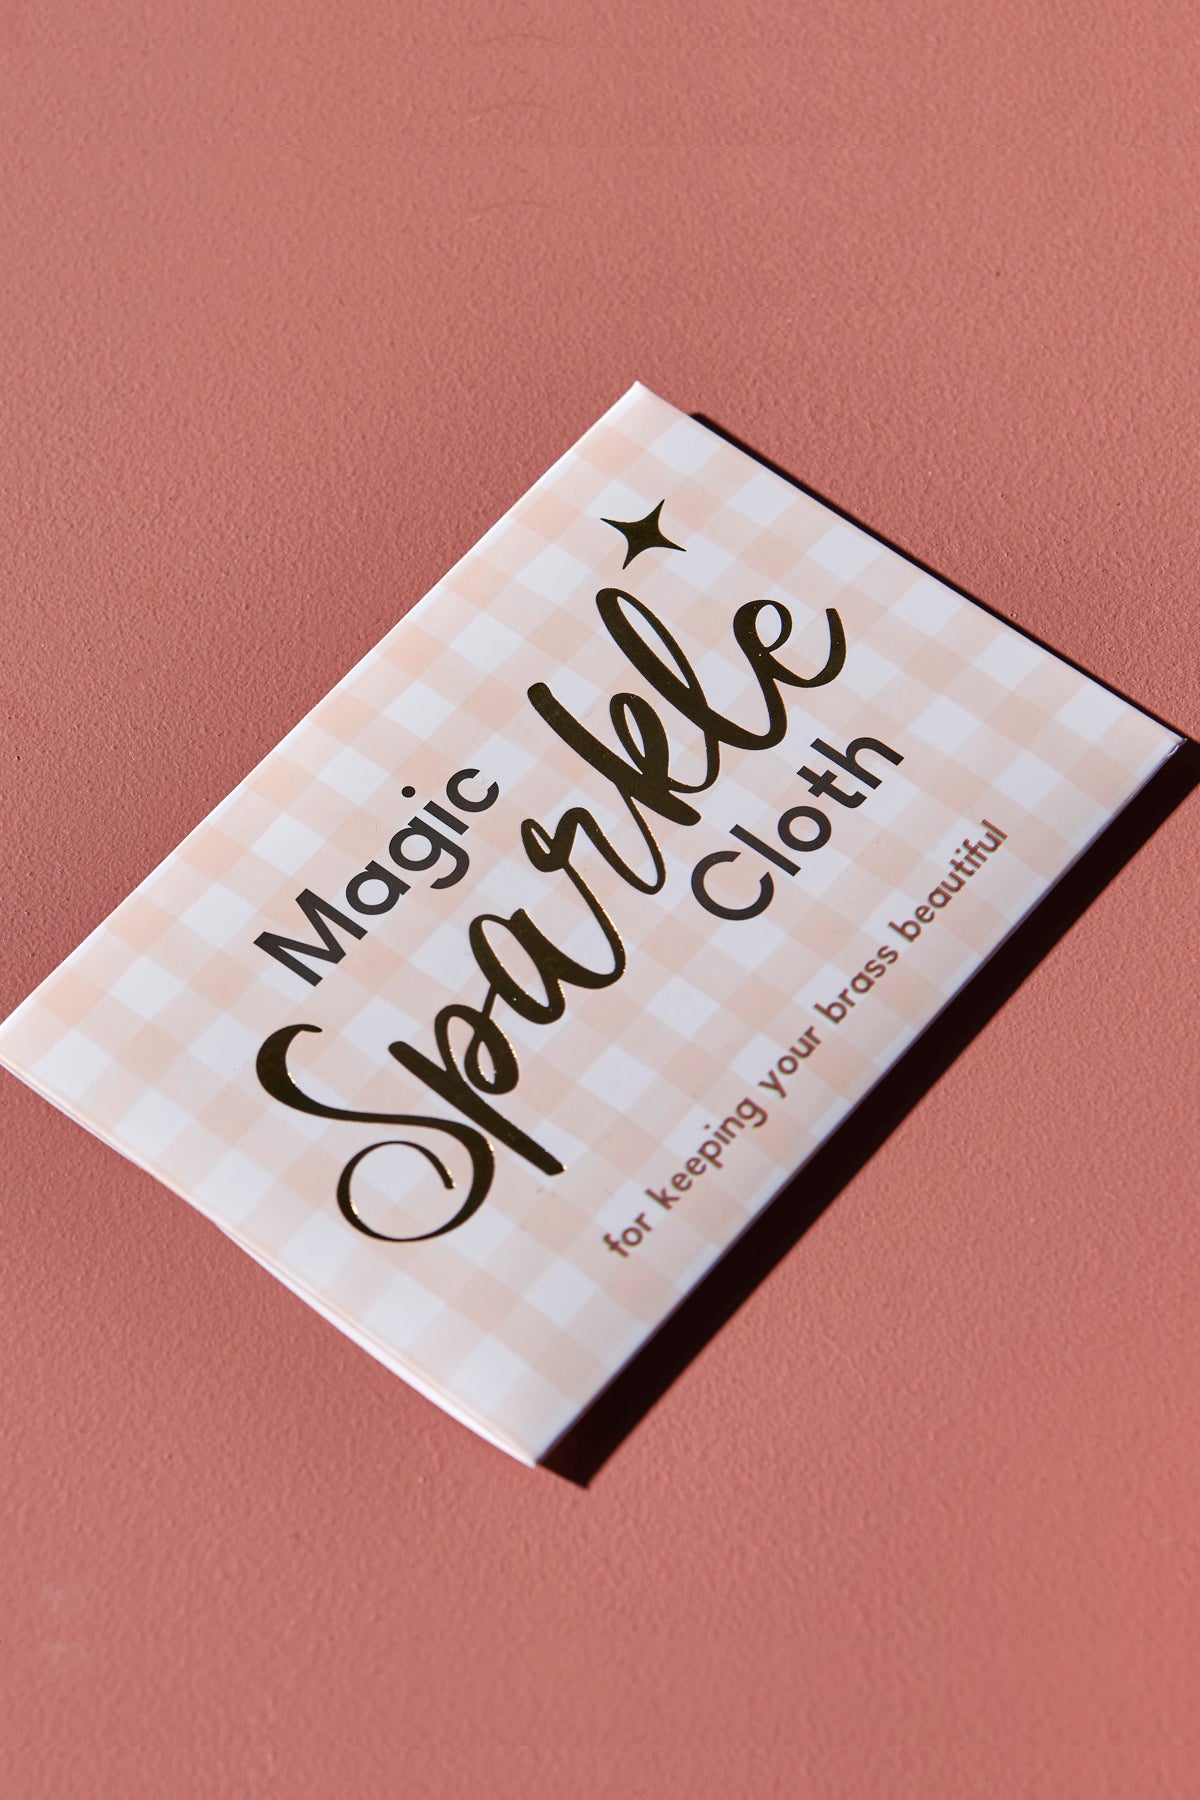 An pink checkered envelope with the words &#39;Magic Sparkle Cloth for keeping your brass beautiful&#39; written in gold foil, sits against a pink background.